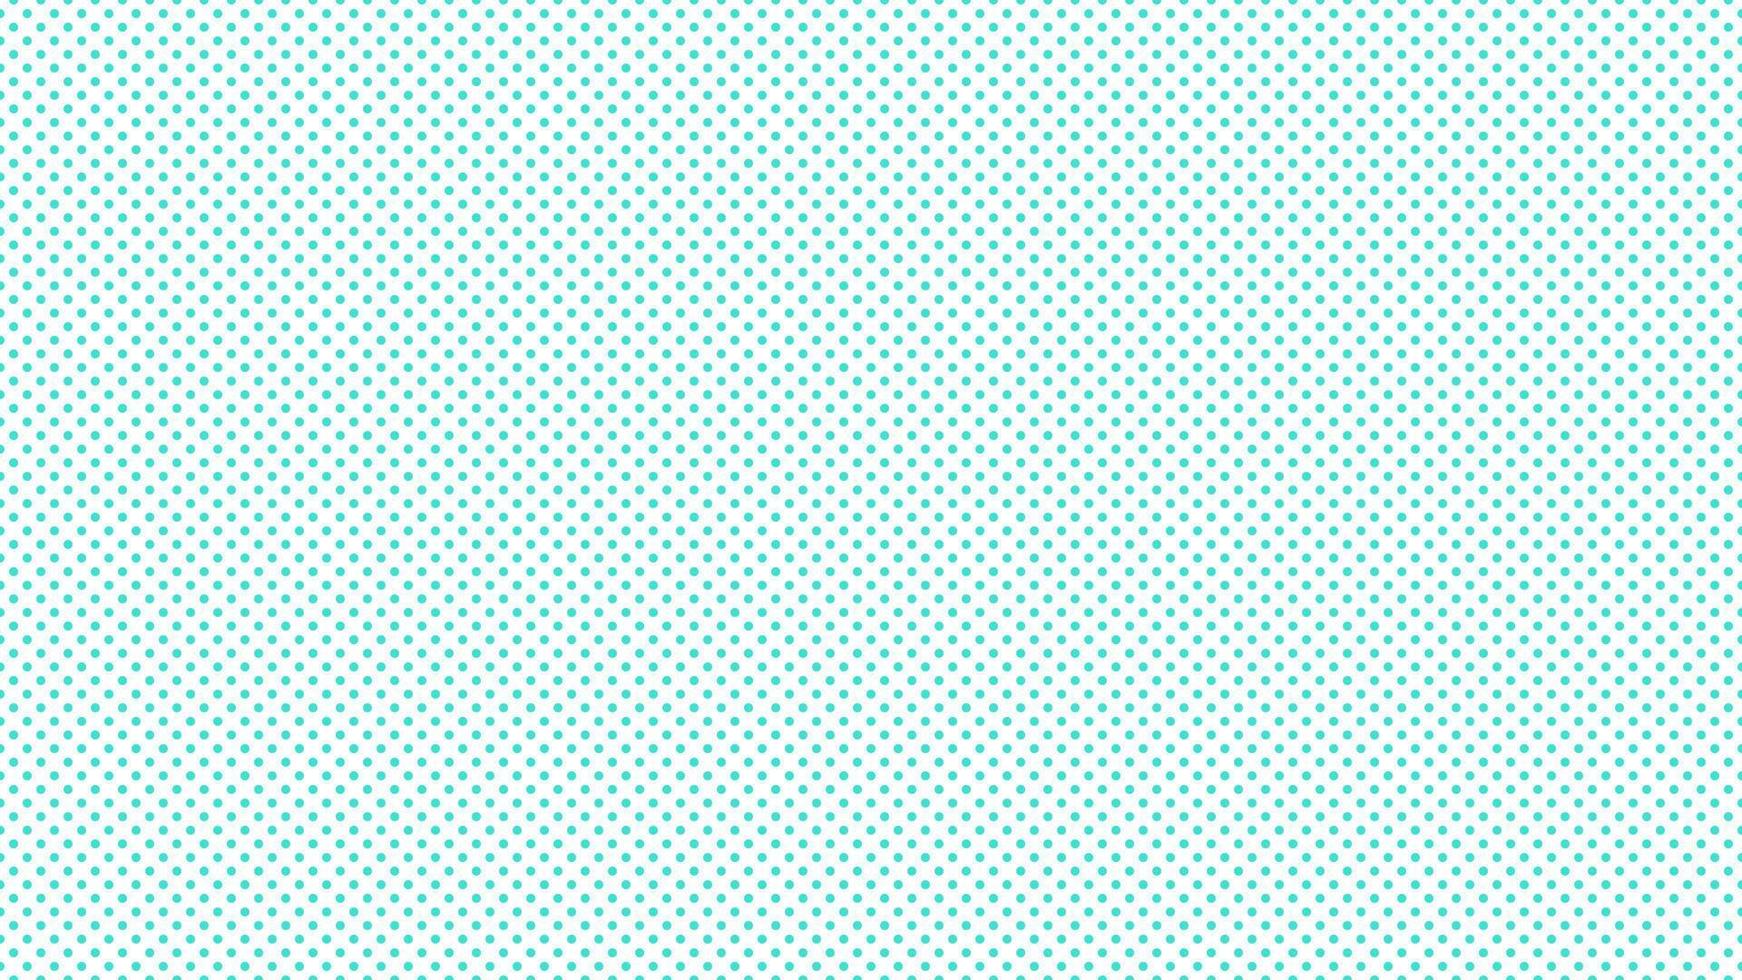 turquoise cyan color polka dots background vector